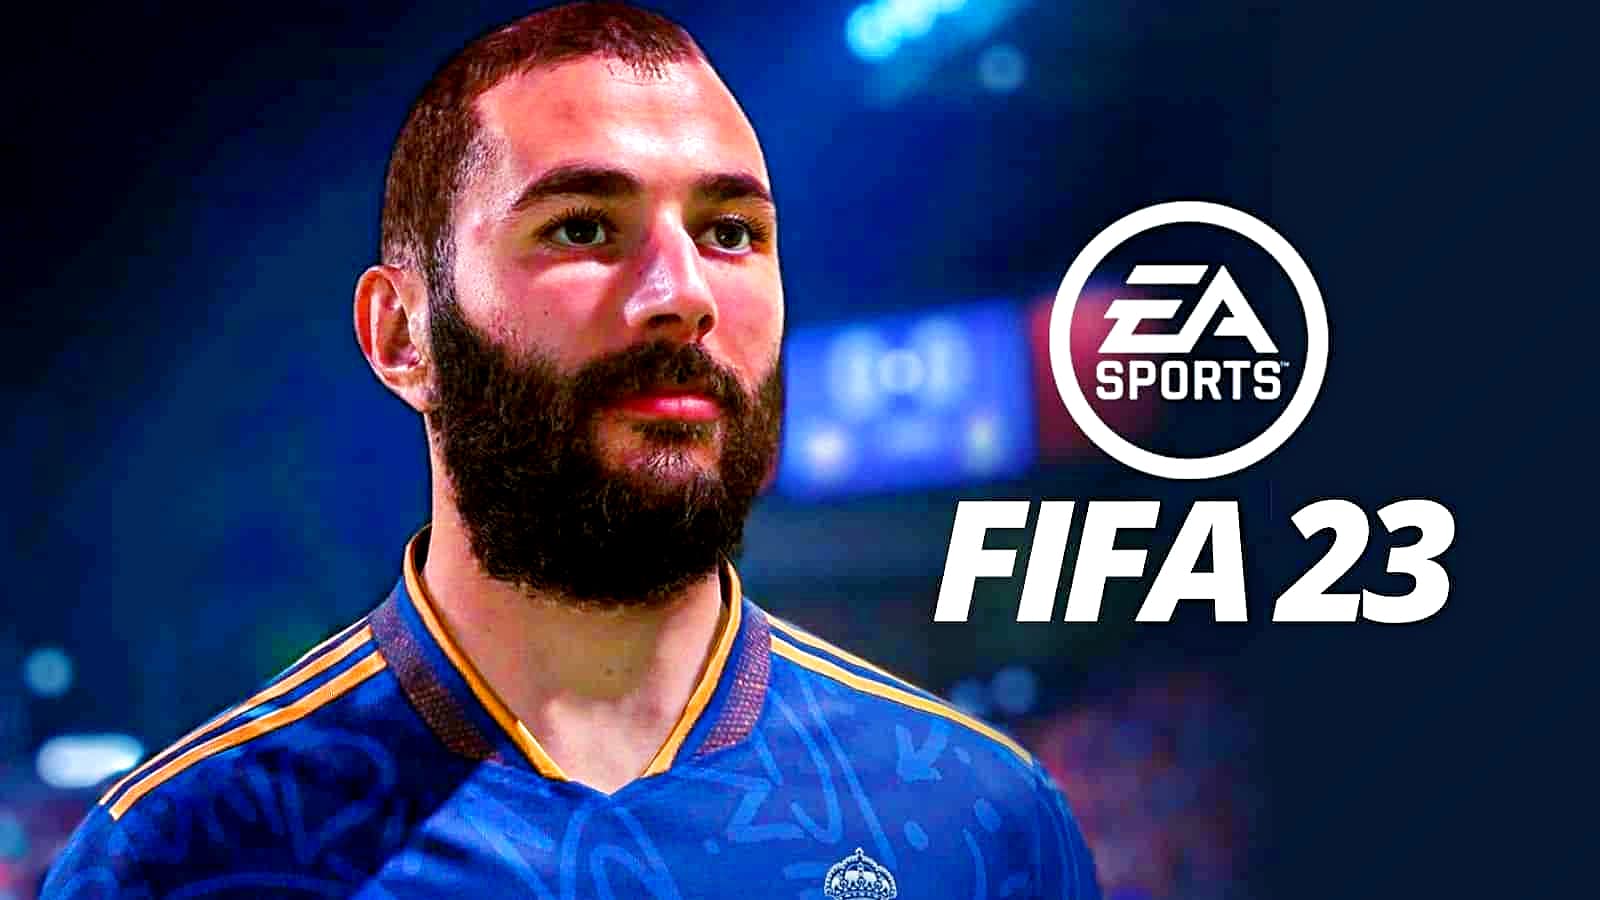 FIFA 23 PC Game Latest Version Trusted Download